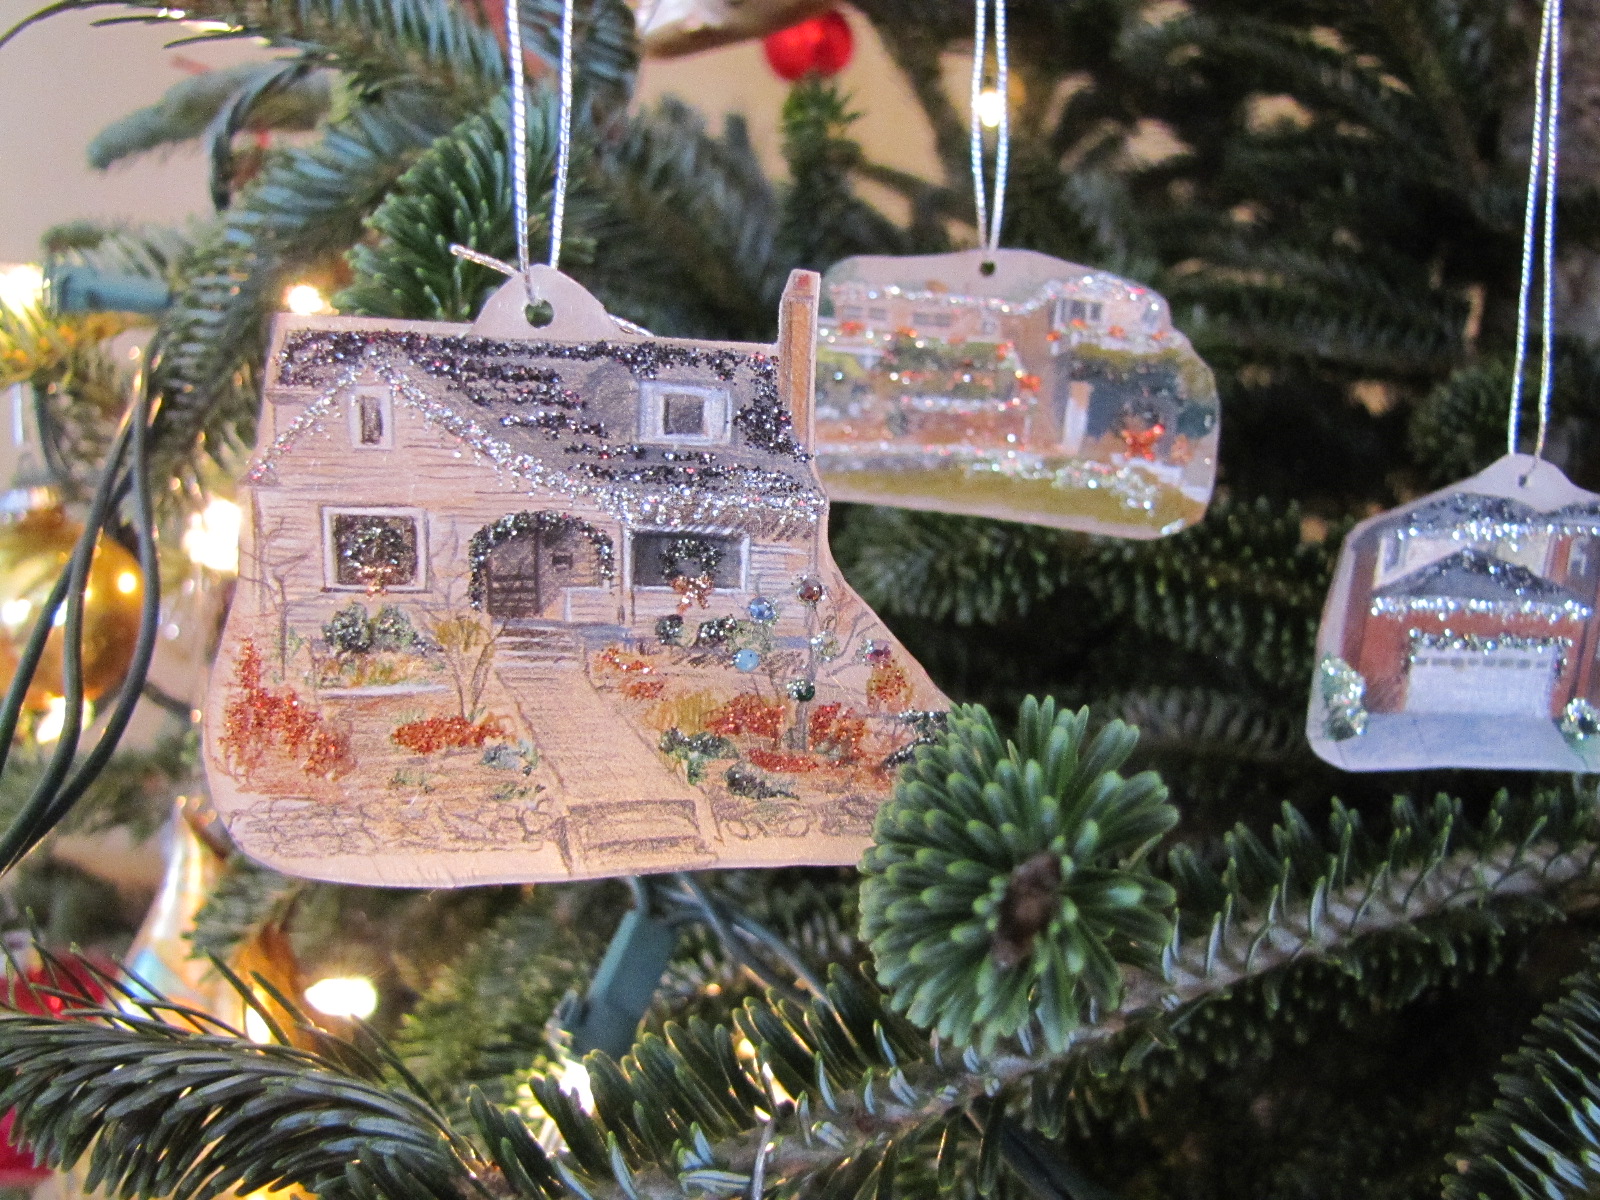 margotmadison-diy-friday-creative-hand-made-ornaments-with-shrinky-dinks